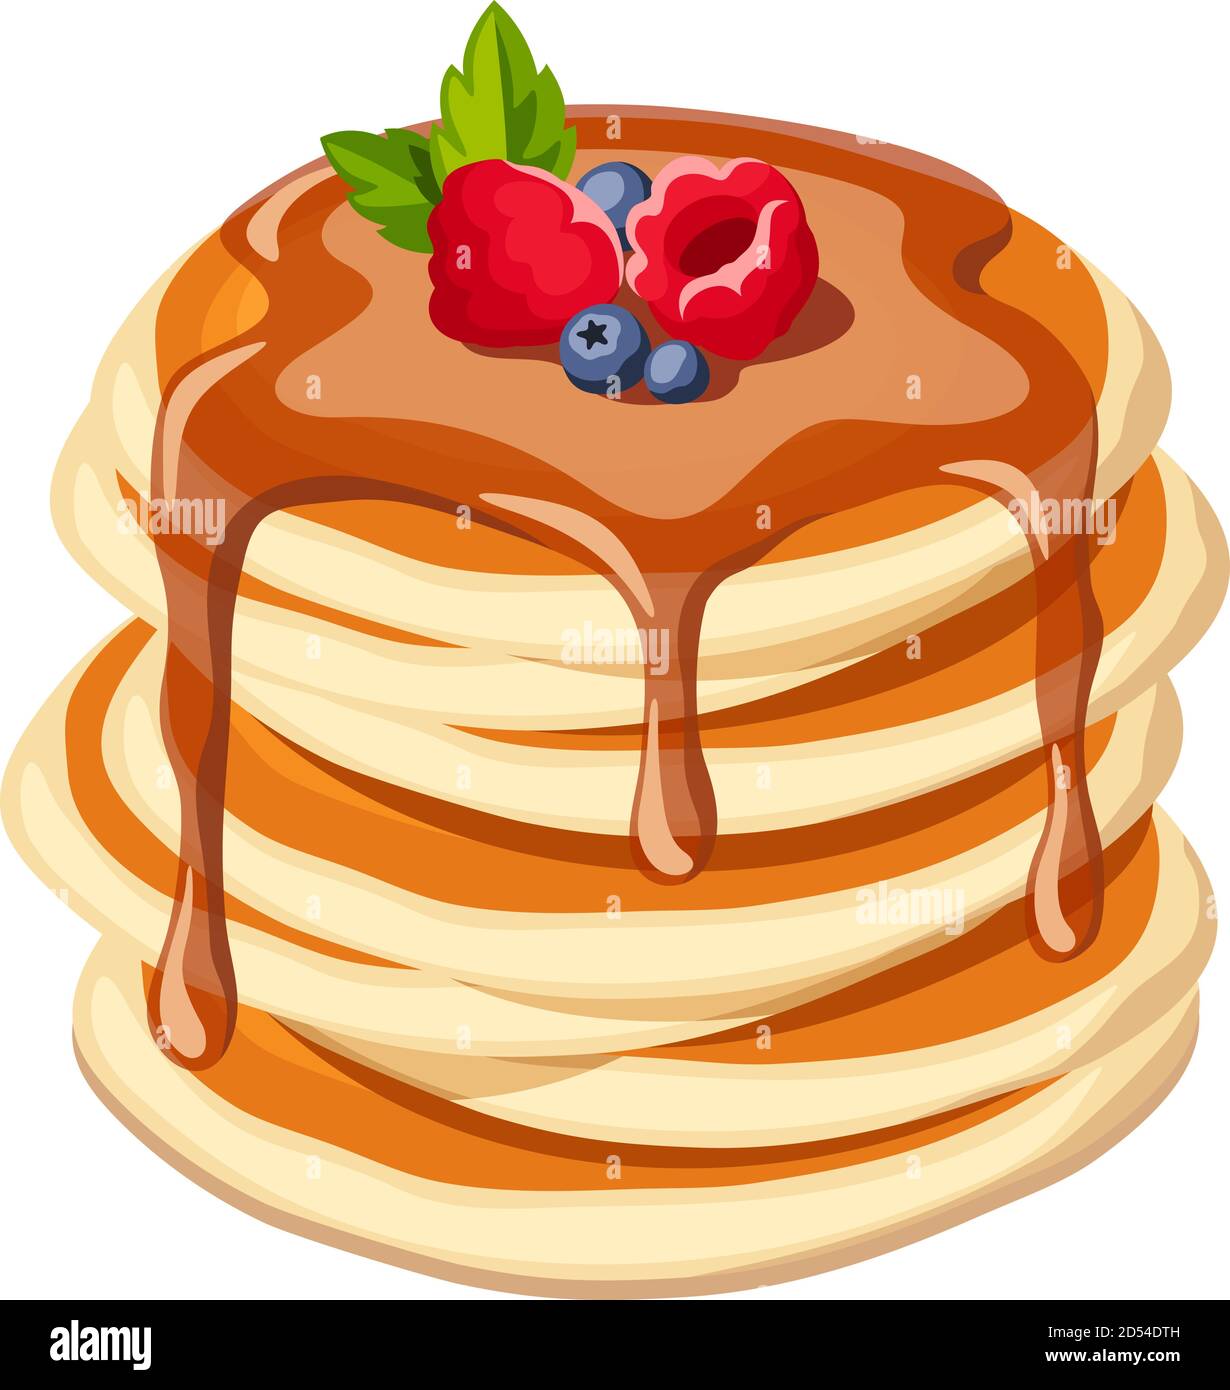 Vector illustration of pancakes with syrup and berries isolated on a white background. Stock Vector